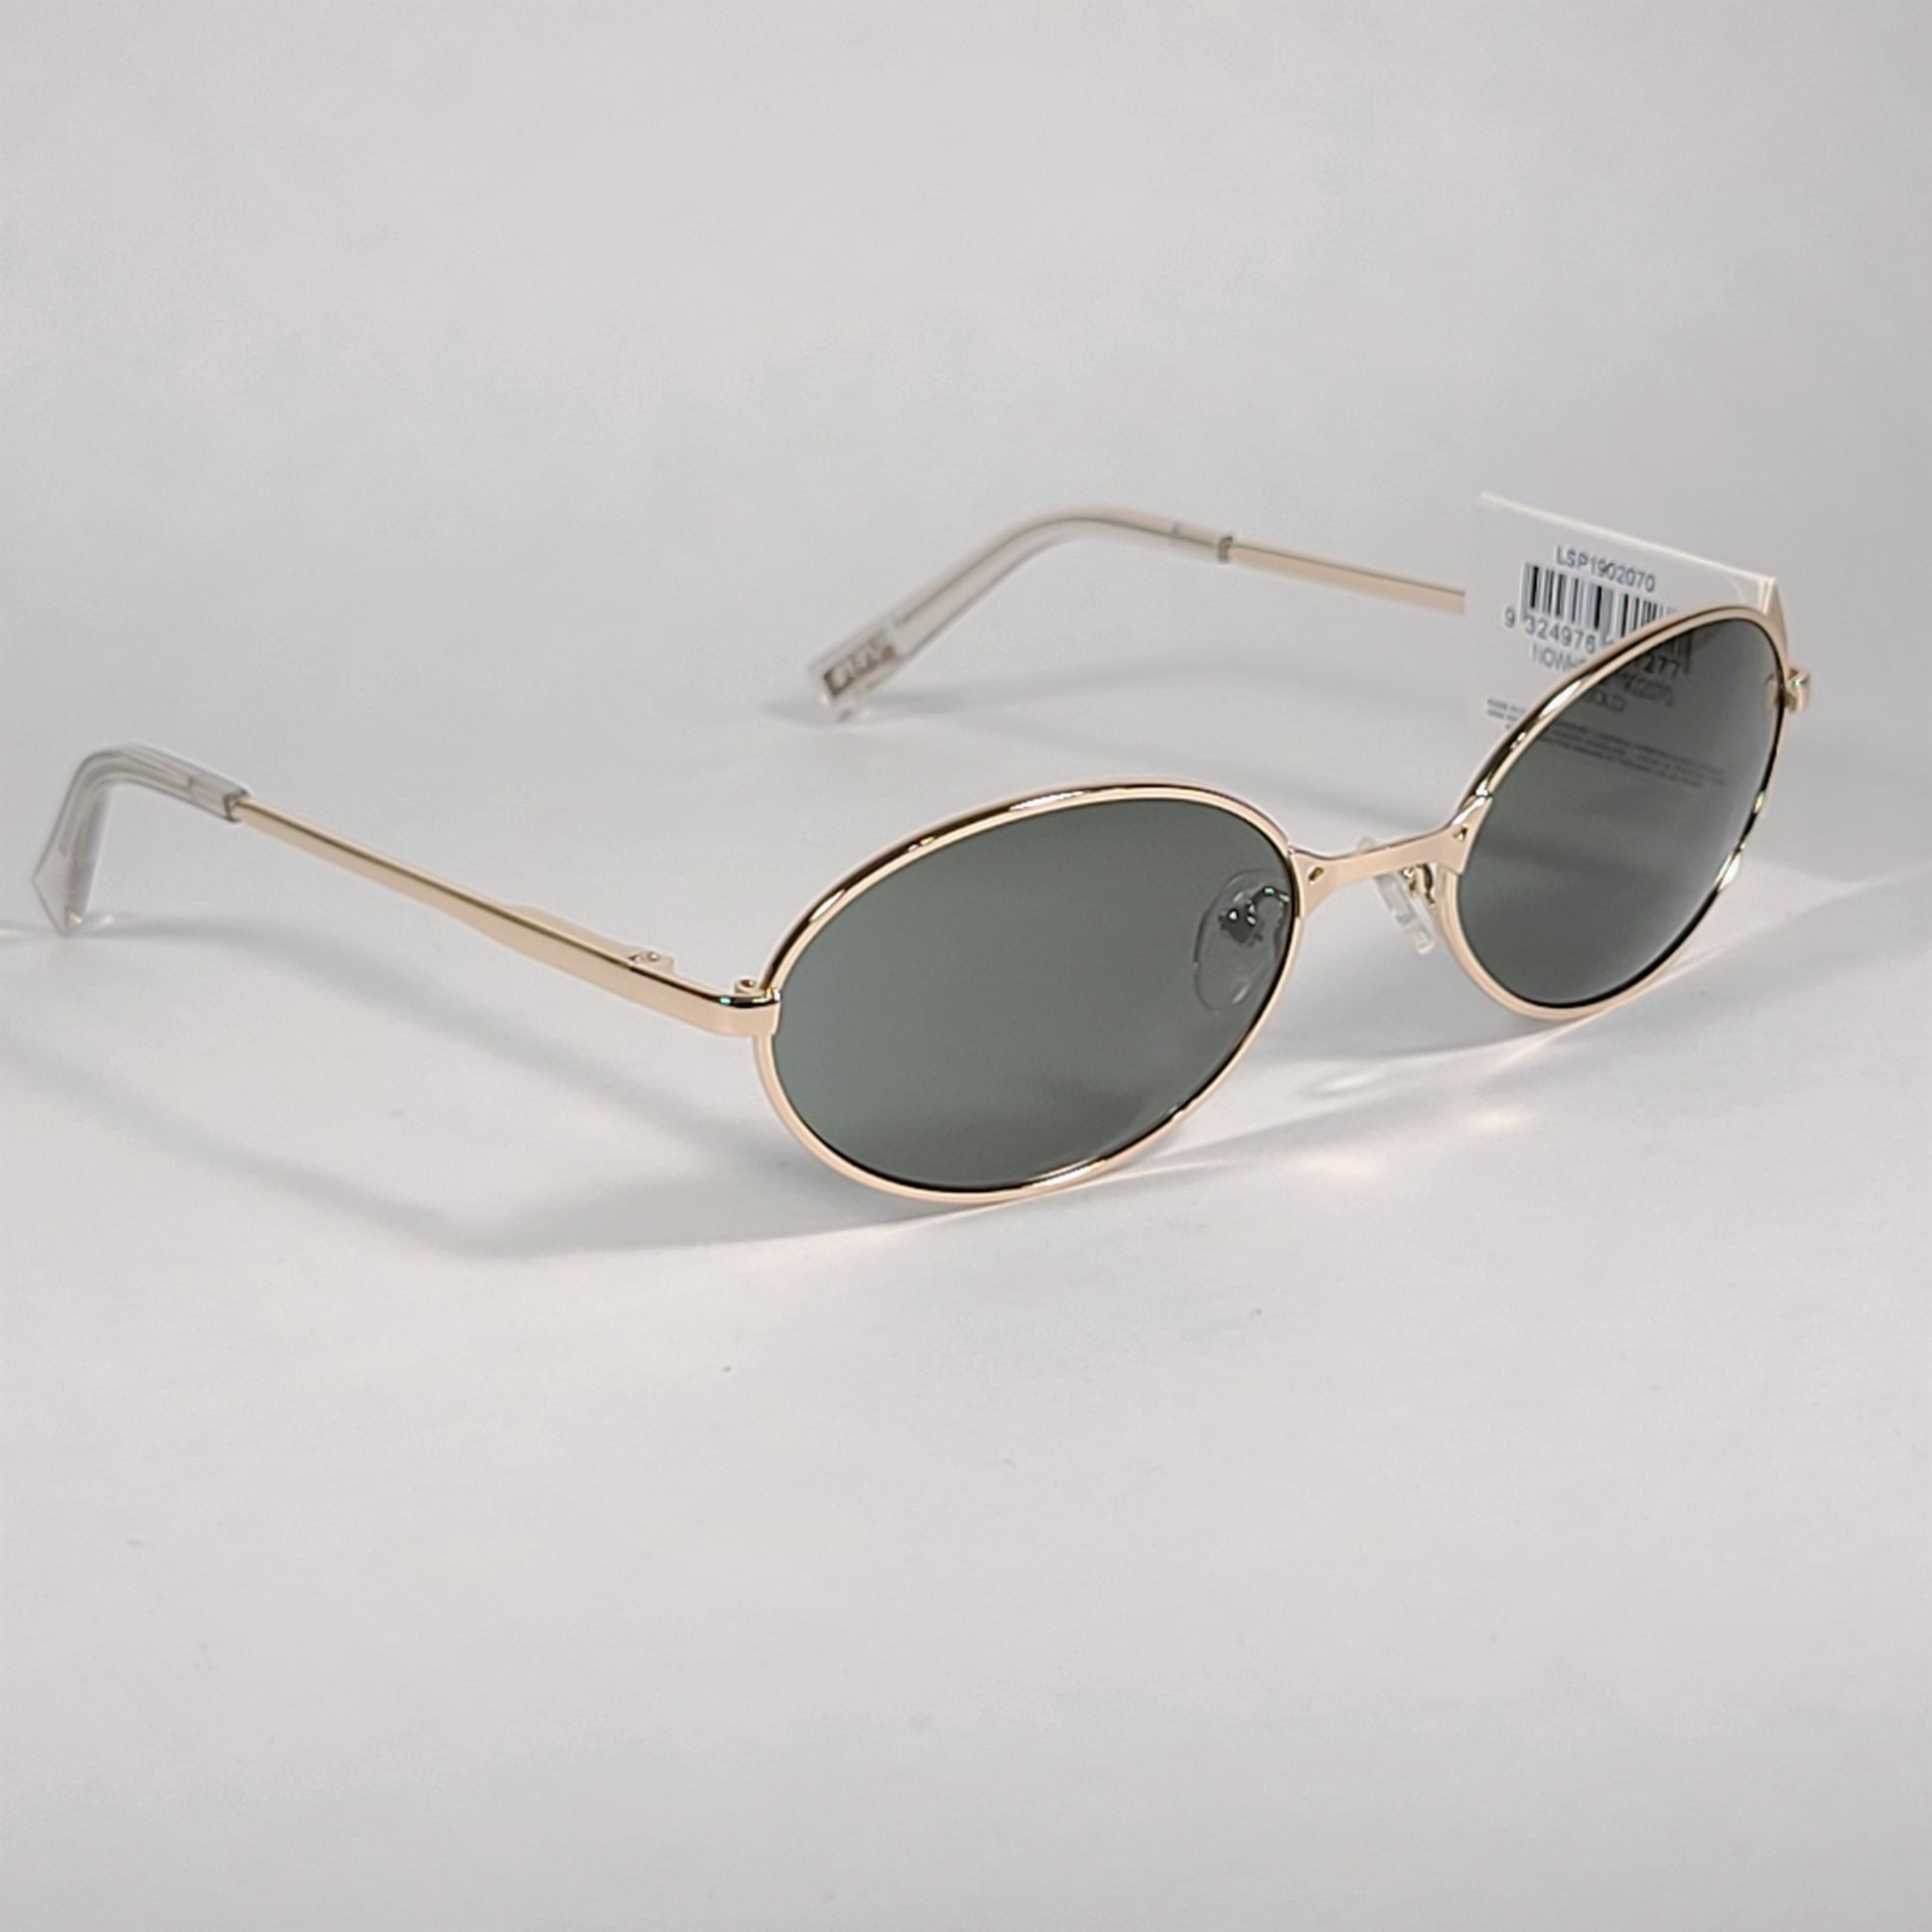 Le Specs Nowhere Flat Oval Sunglasses Gold Frame Gray Green Mono Lens LSP1902070 GOLD - Sunglasses